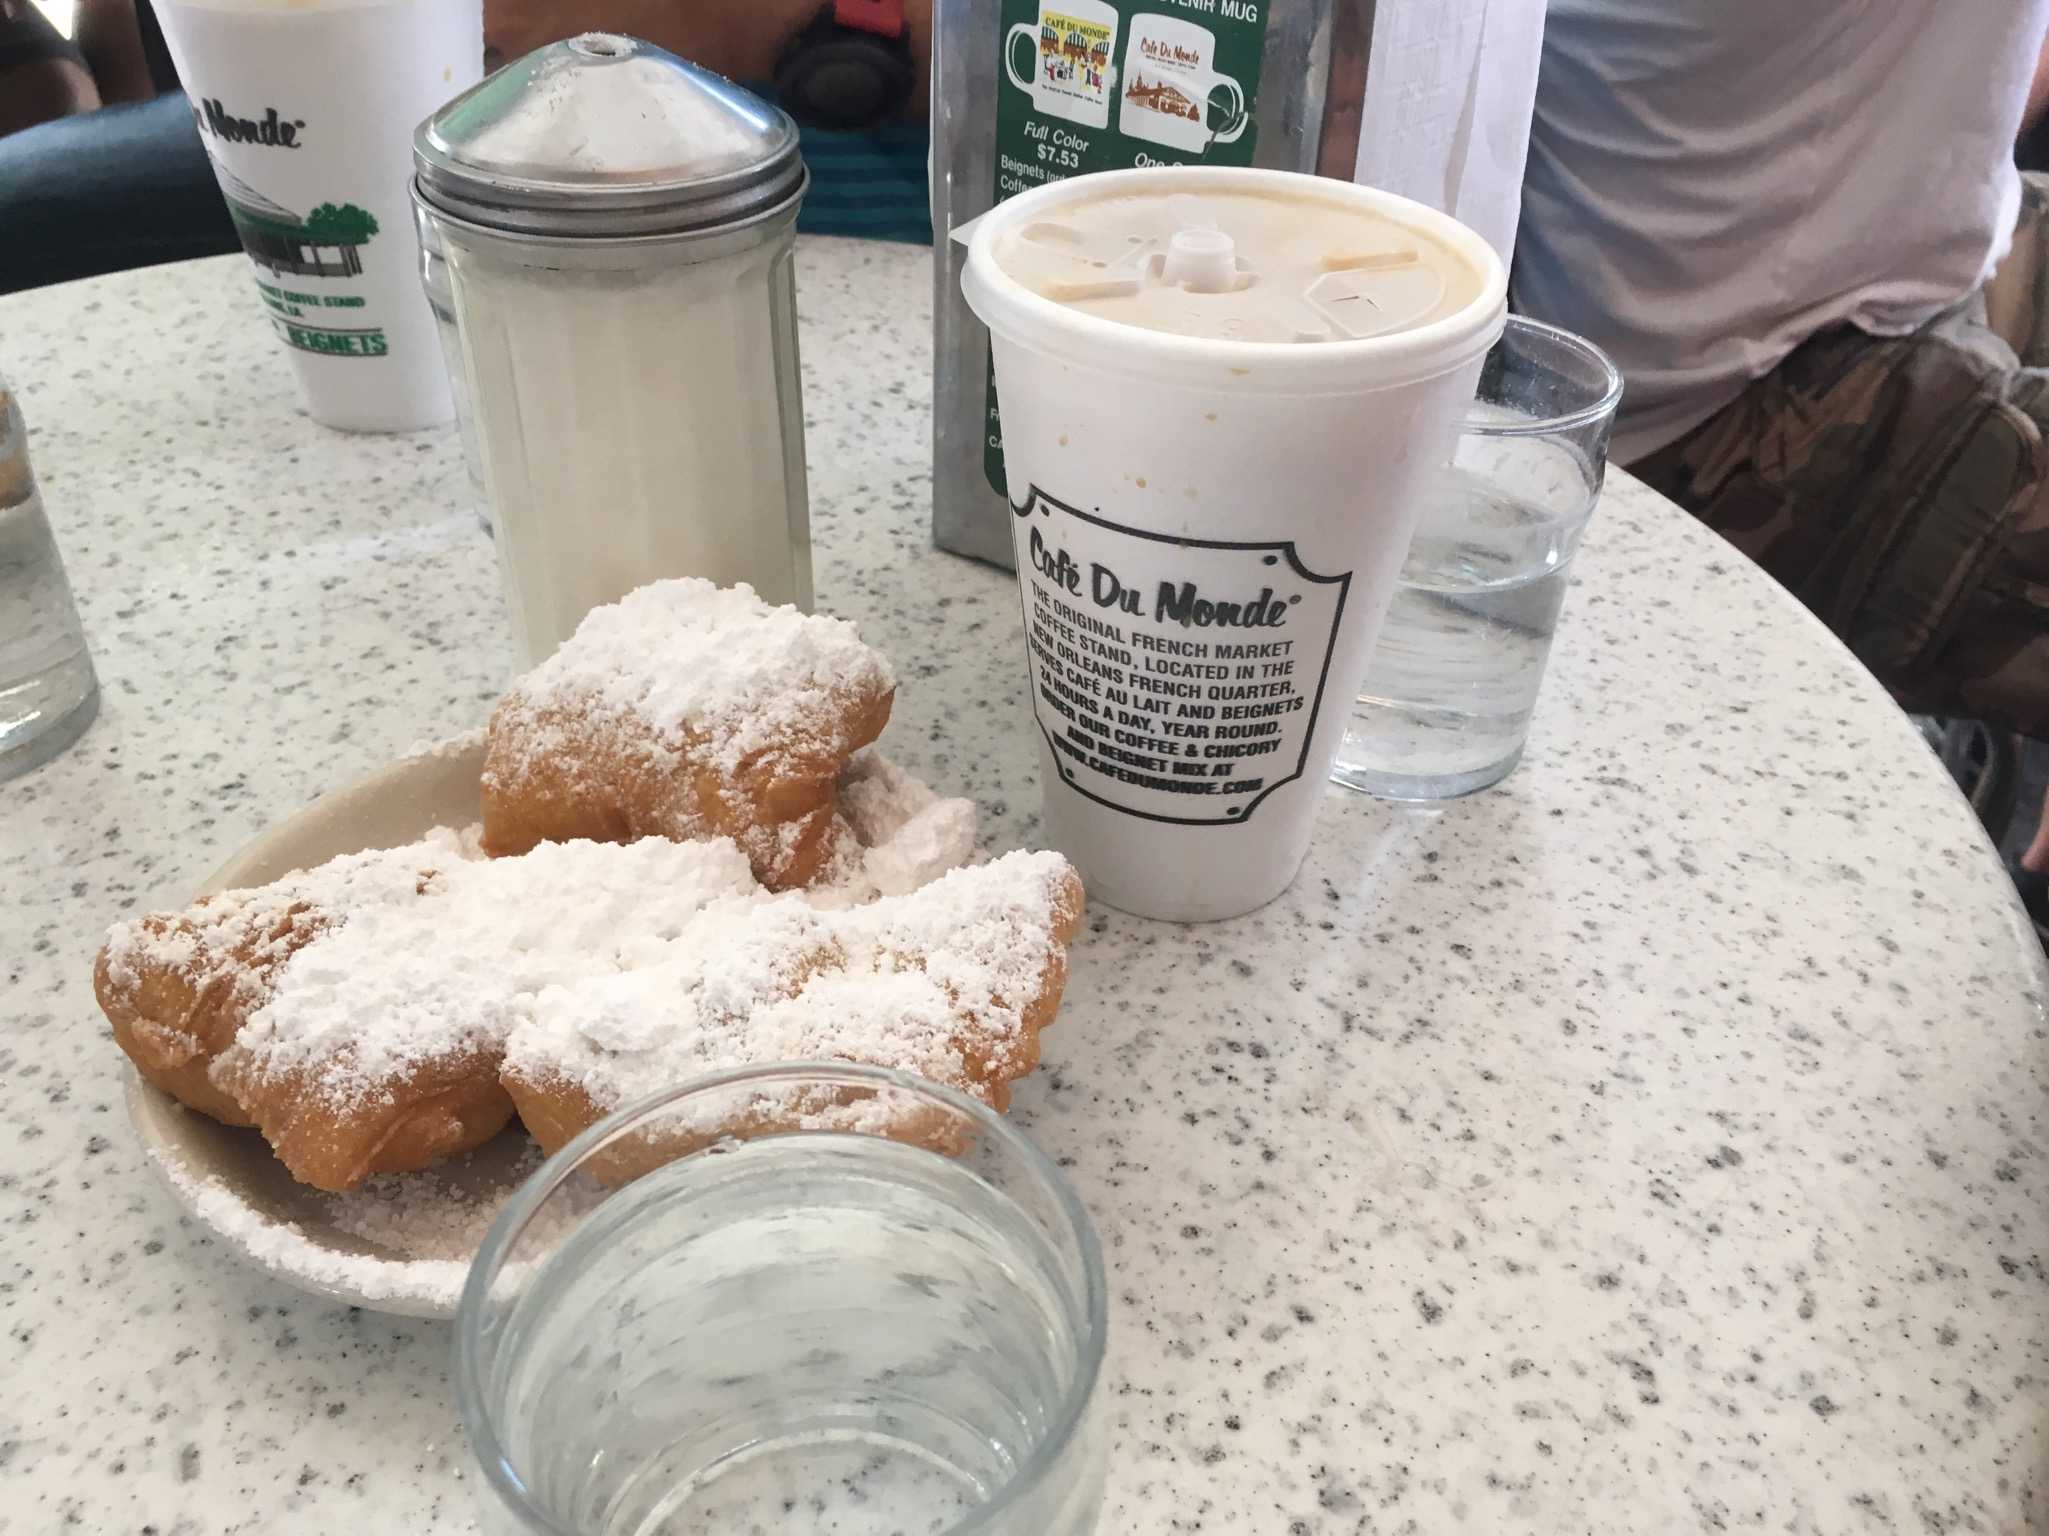 BEIGNETS AND COFFEE: Try Cafe au Lait with the beignets at Cafe du Monde — that's a delicious pair!